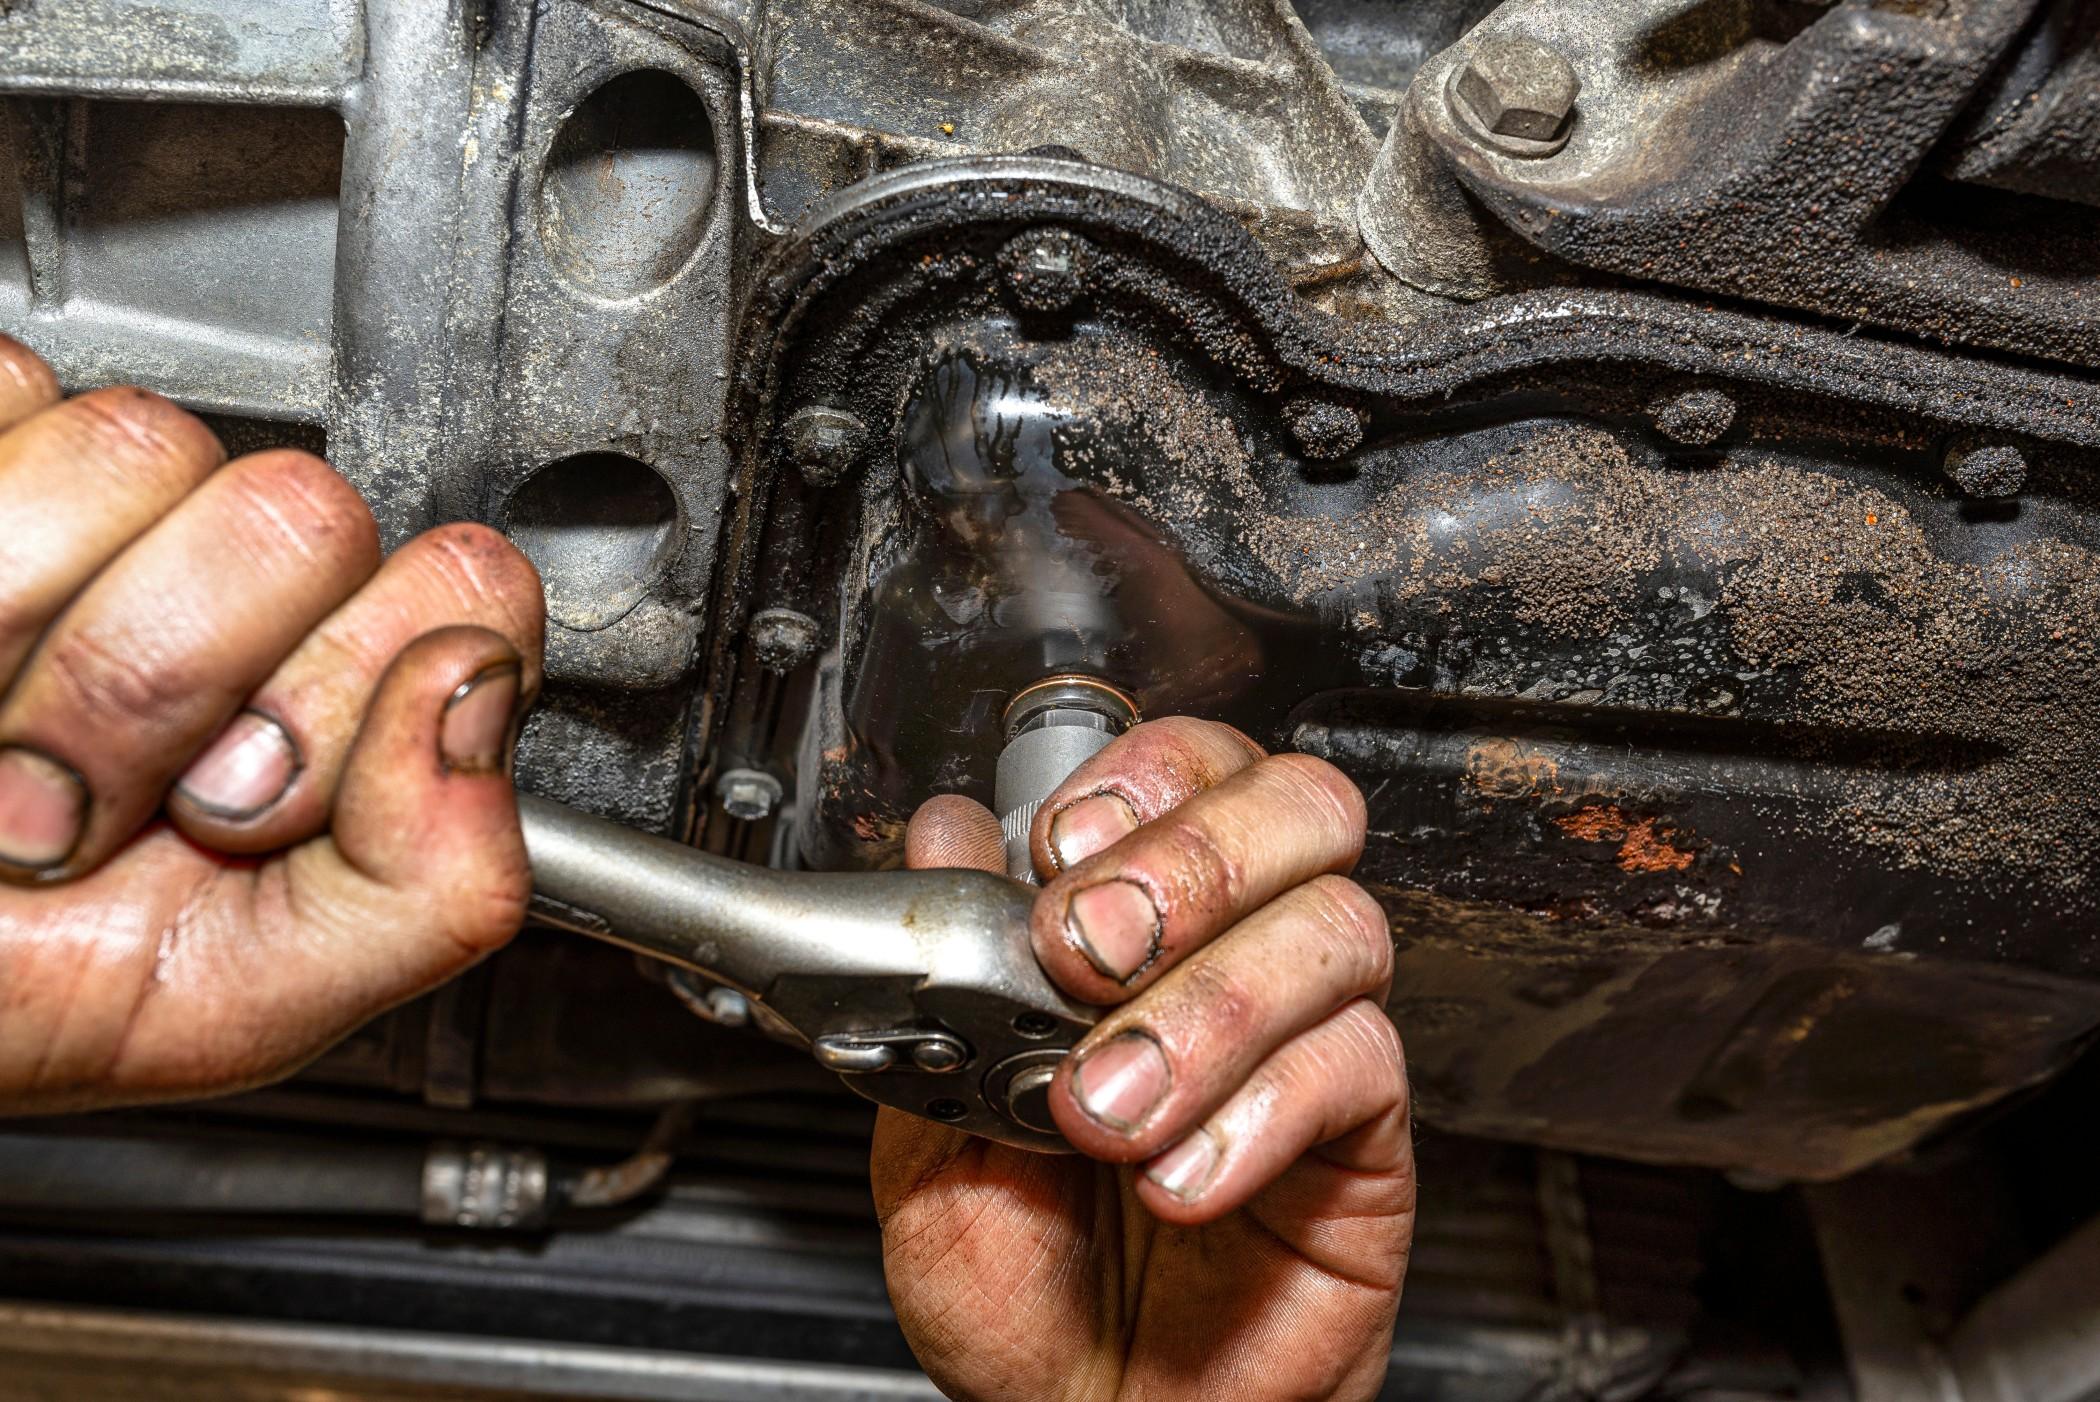 Finding an oil leak can be a tricky problem to solve.